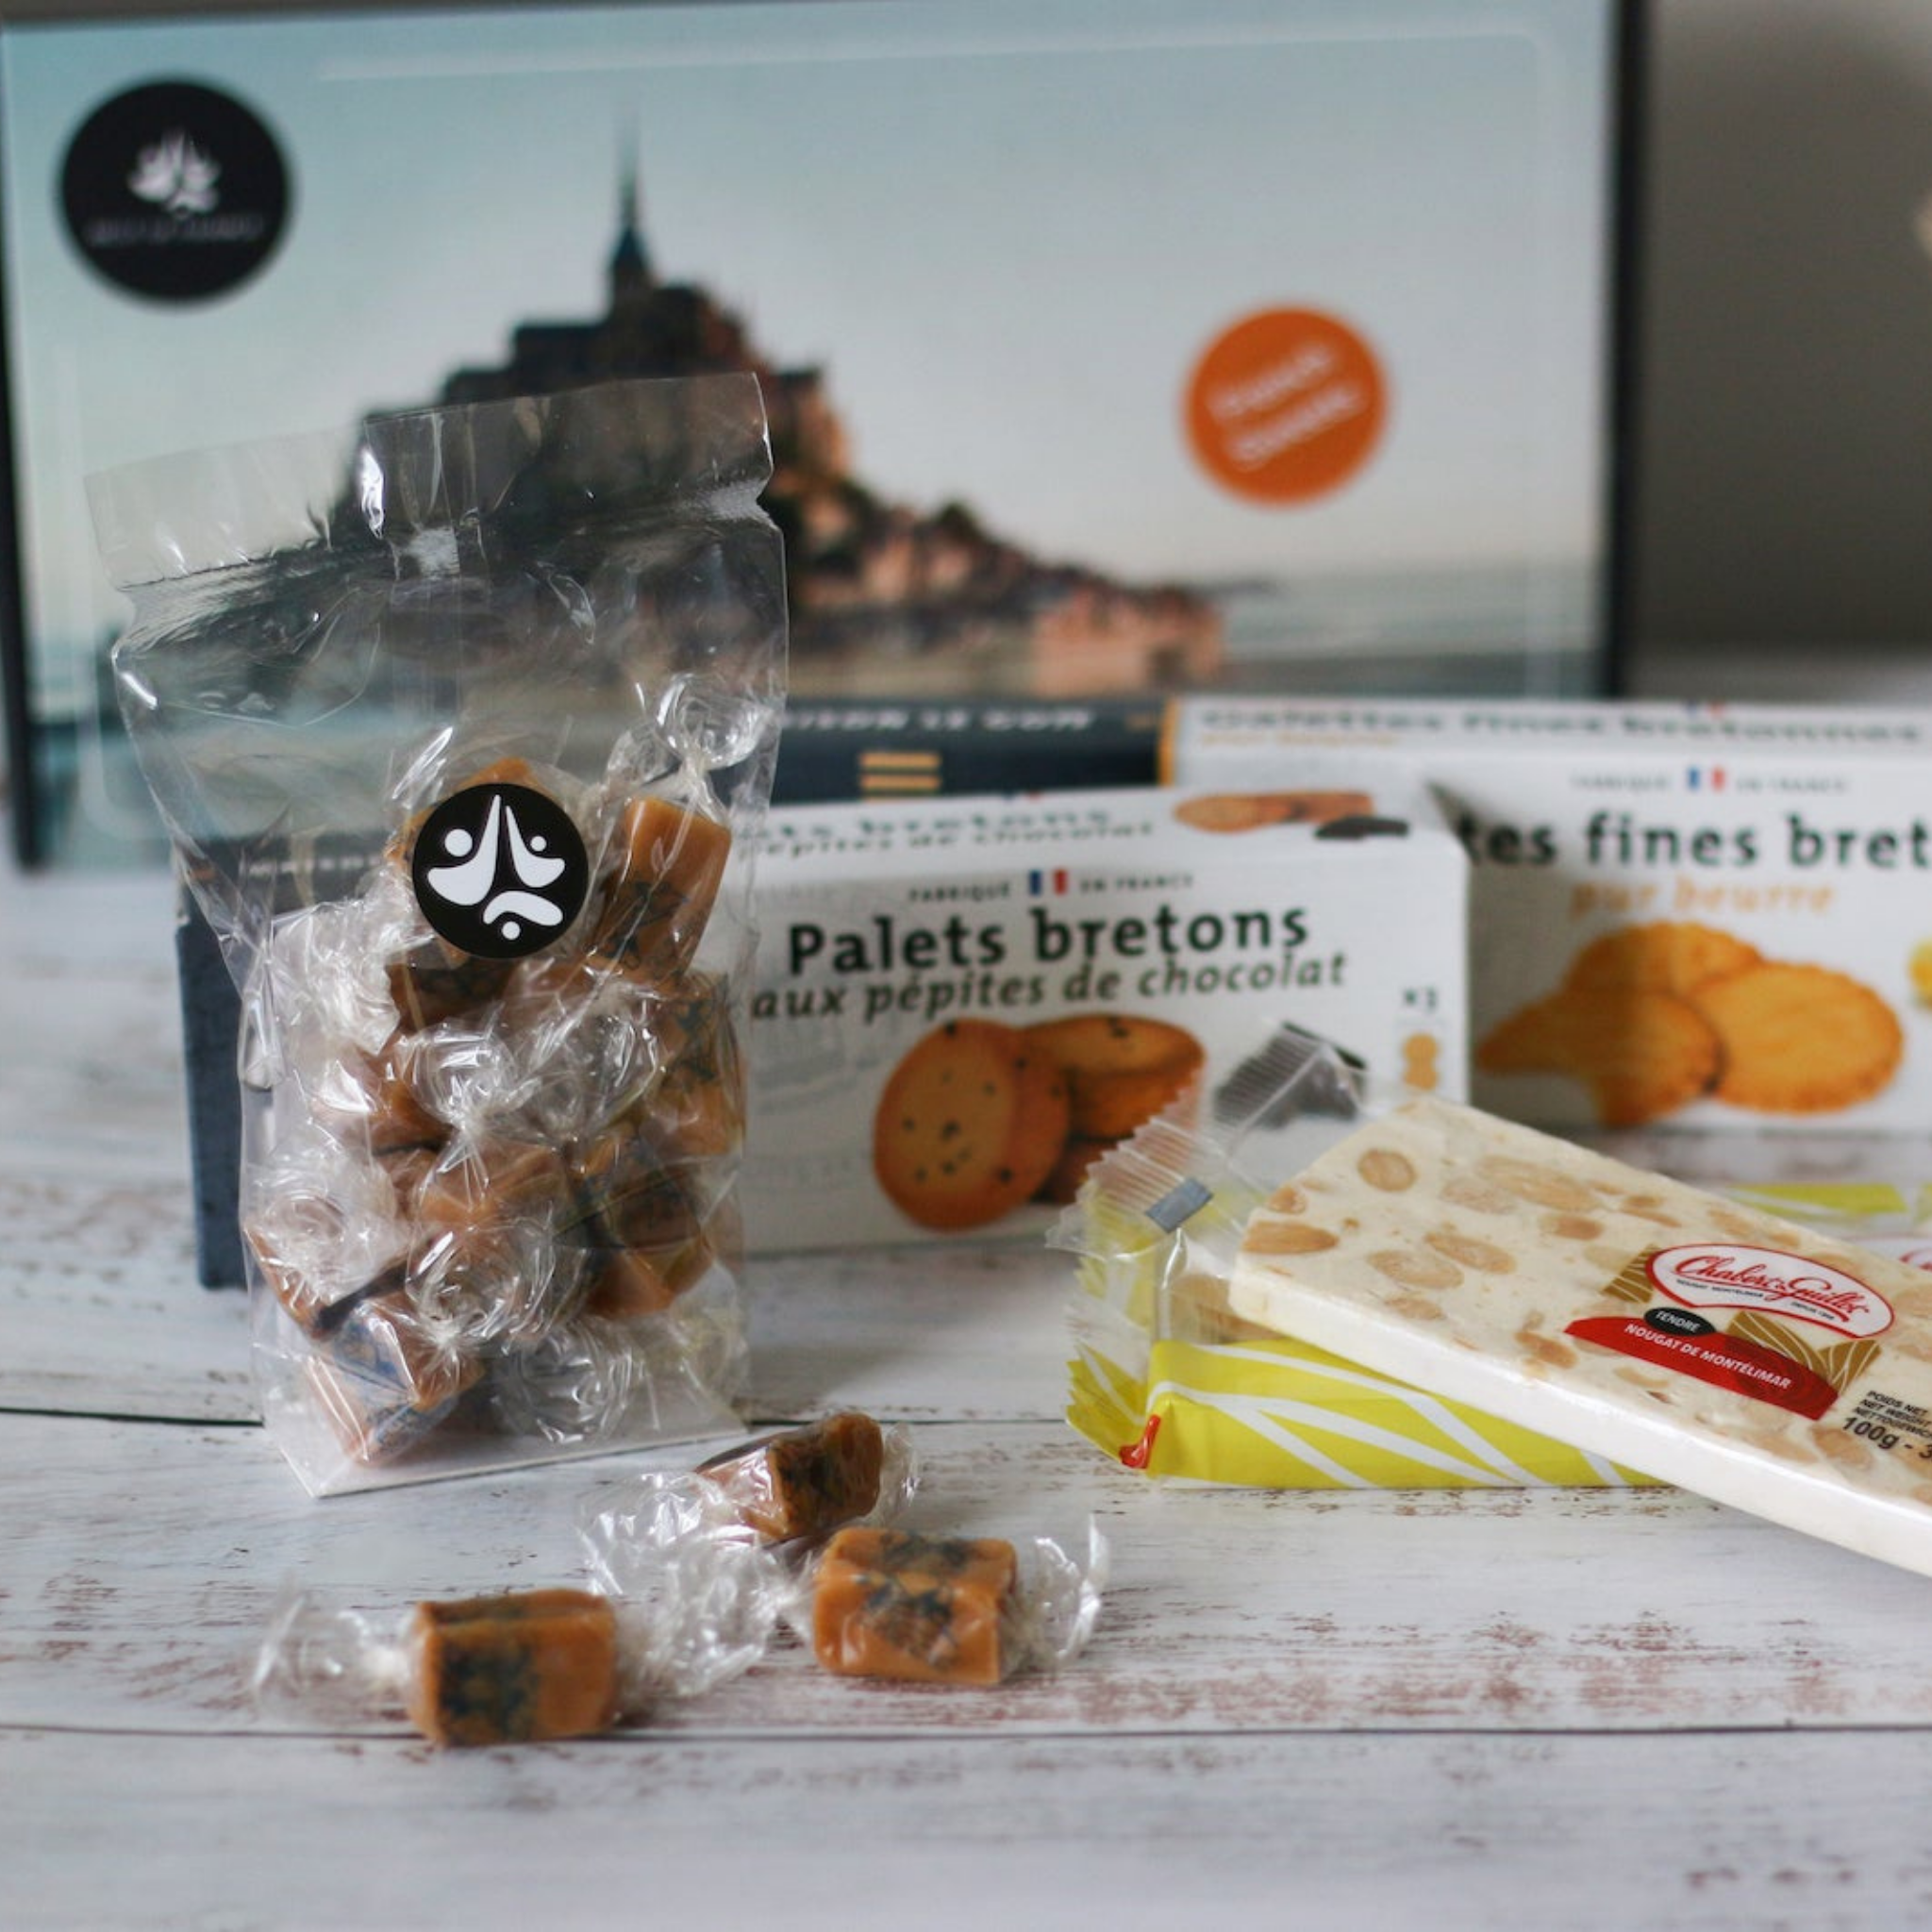 French Sweets Gift Box